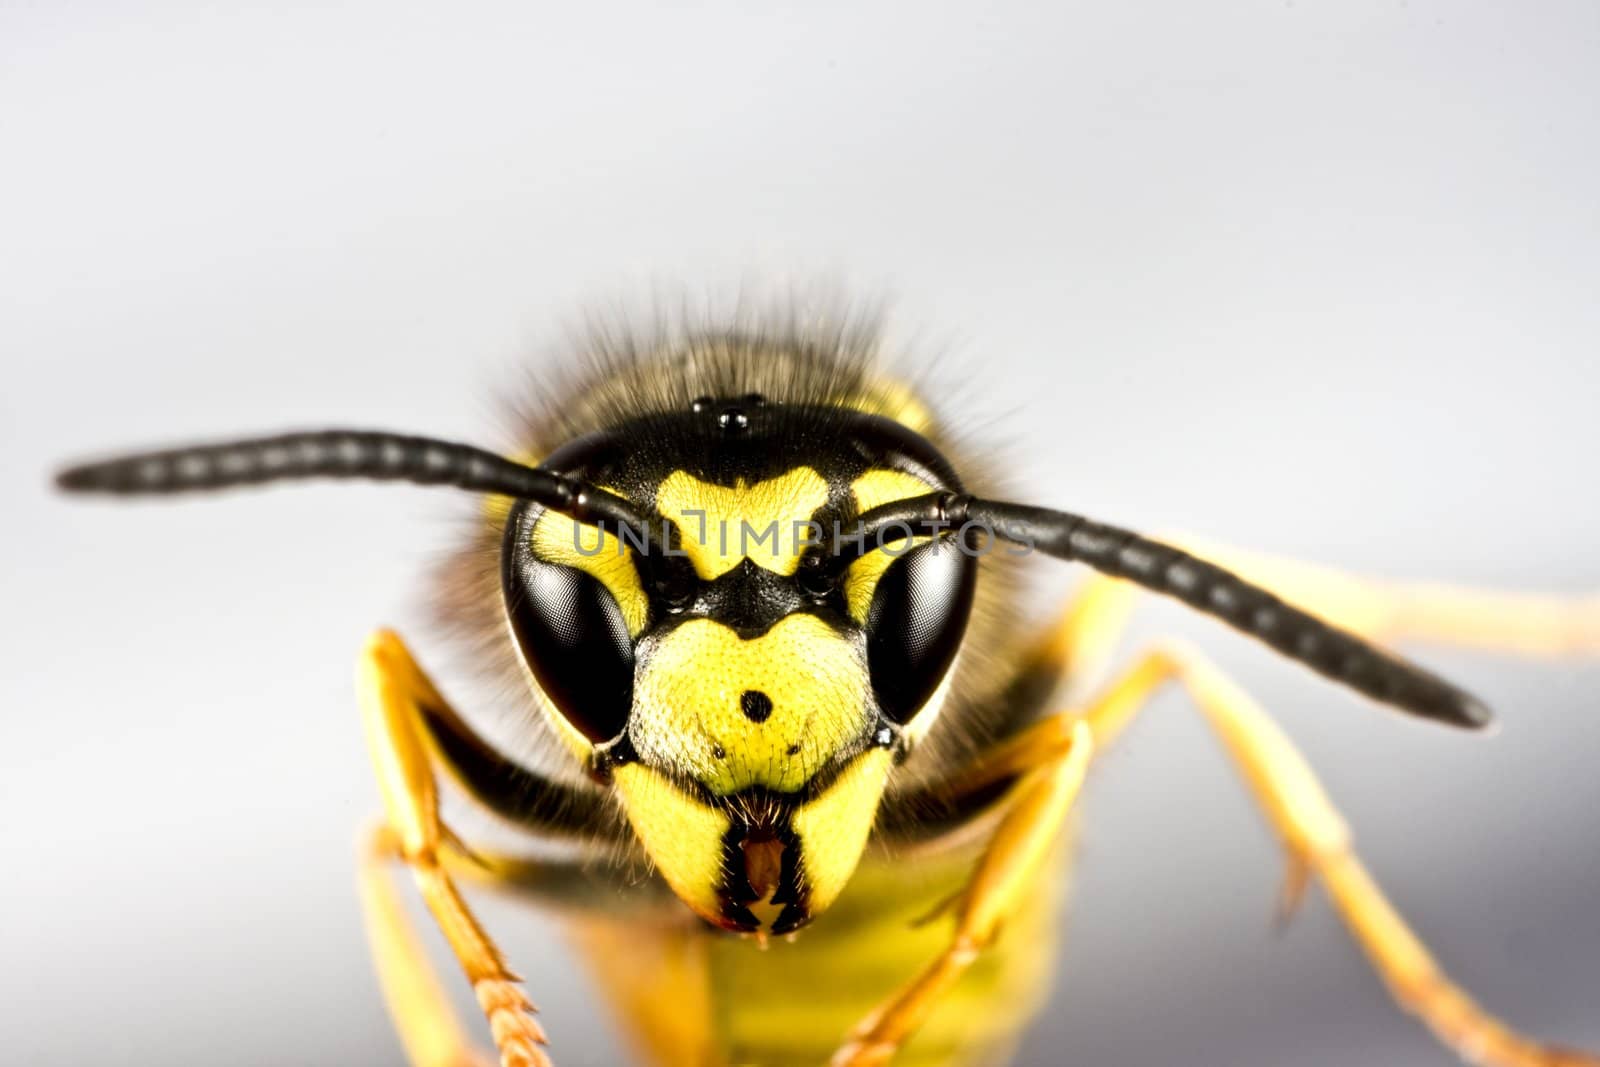 head of wasp in extreme close up with grey background